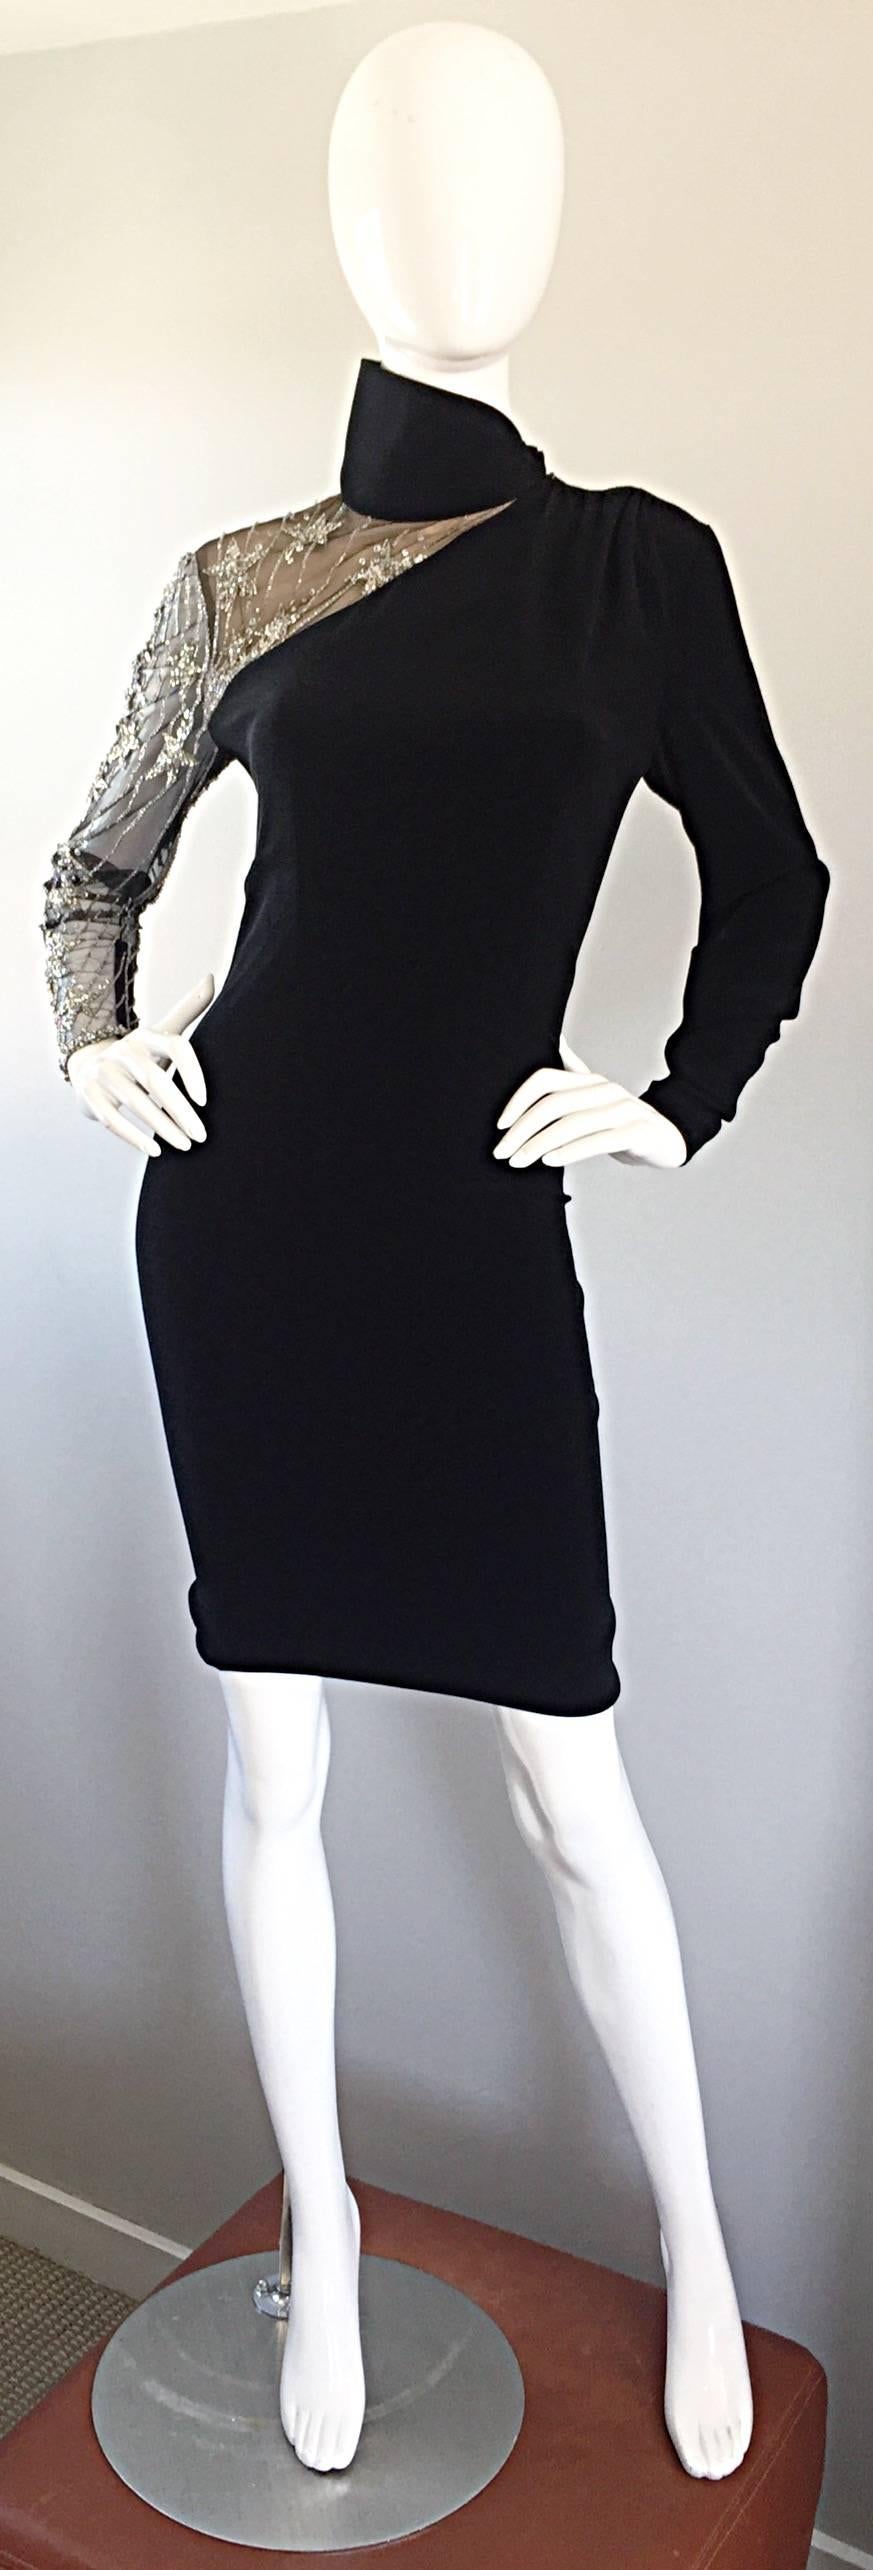 Sexy vintage BOB MACKIE 1990s / 90s  black Avant Garde bodycon dress as seen on MILEY CYRUS ! Tailored body hugging fit, with one nude illusion sleeve that features silver hand-sewn sequins in the shape of shooting stars. Tailored long black sleeve